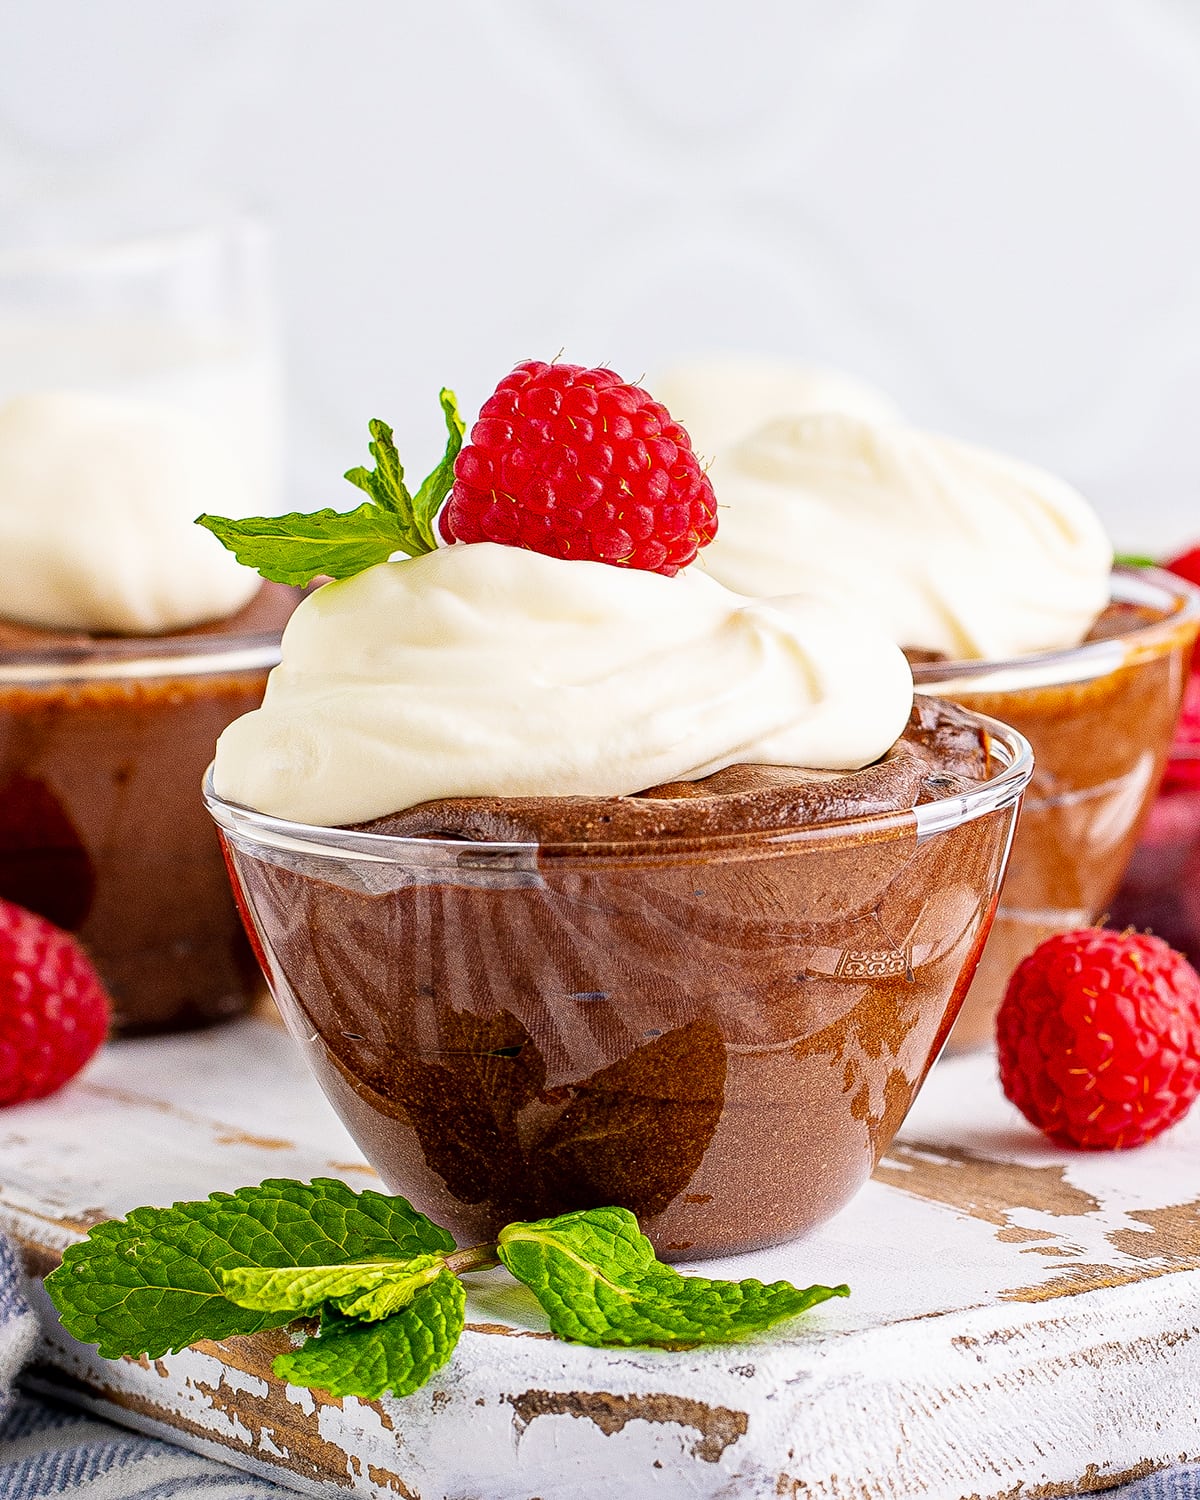 A close up of a bowl of chocolate mousse topped with whipped cream, and a raspberry.